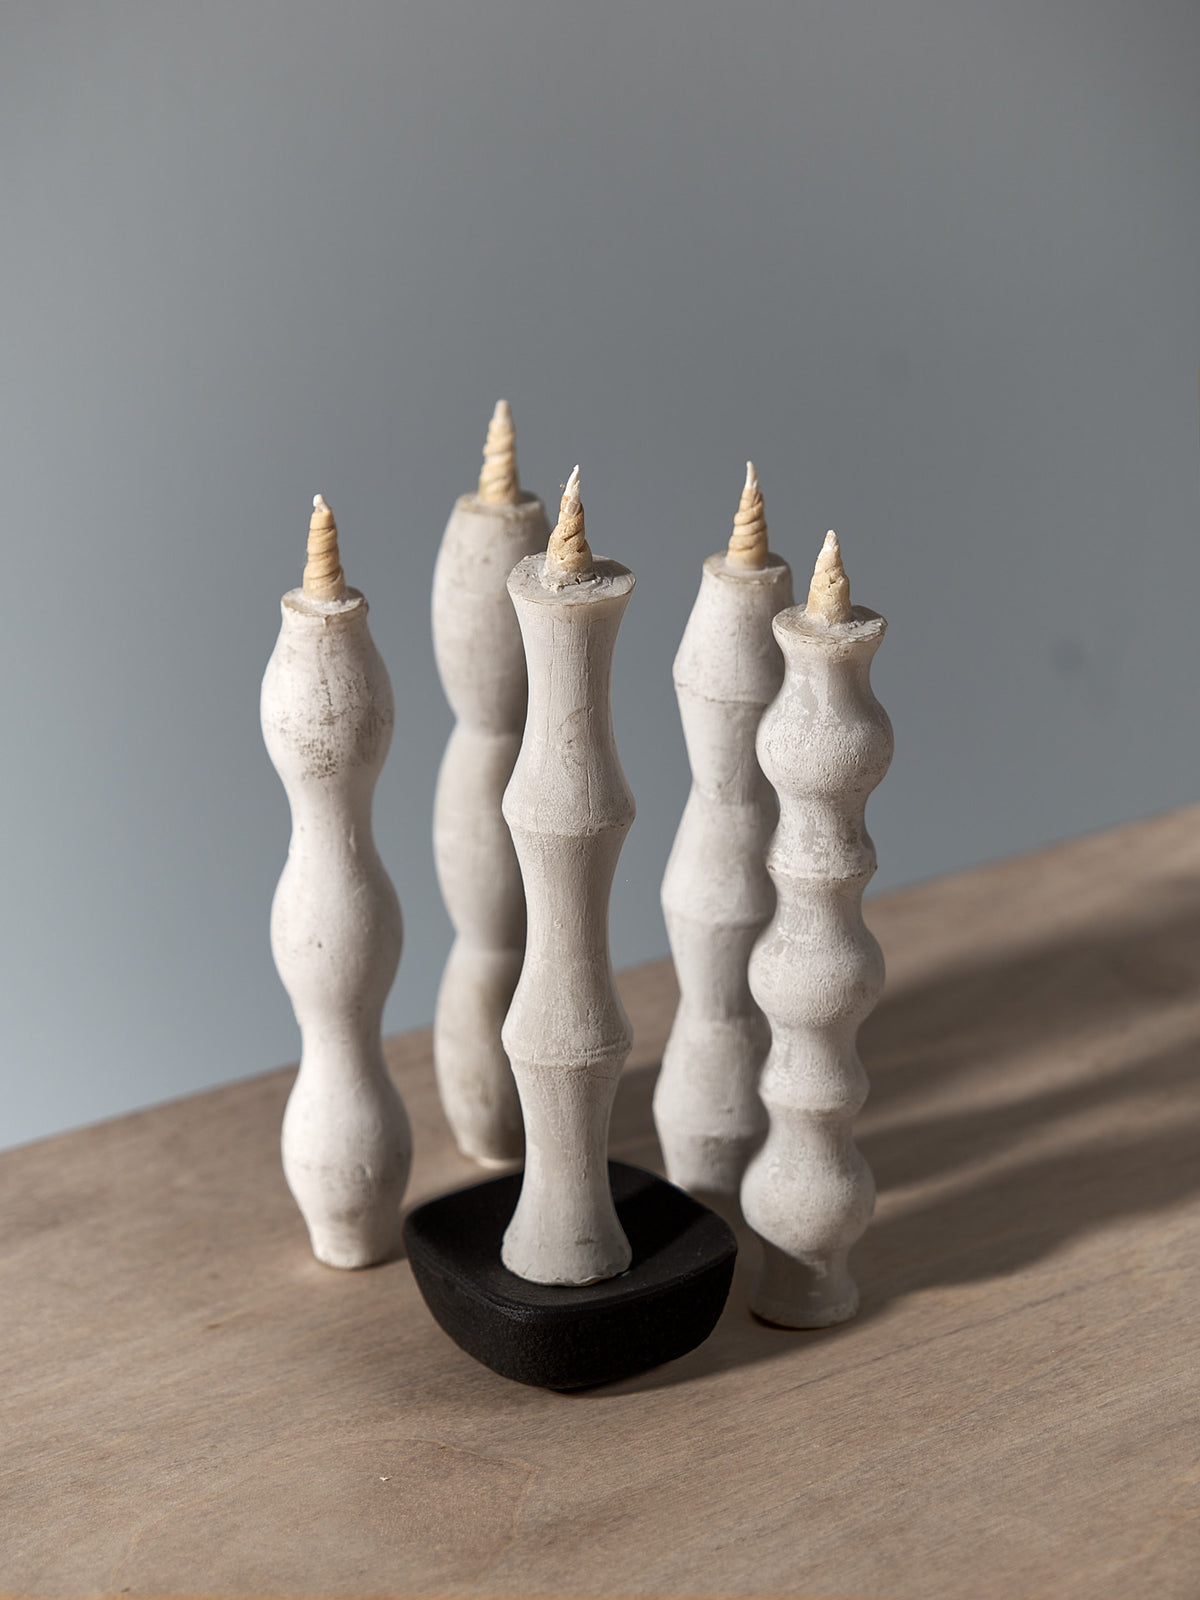 Four NANAO-L candle holders on a wooden table. (Brand: Takazawa)